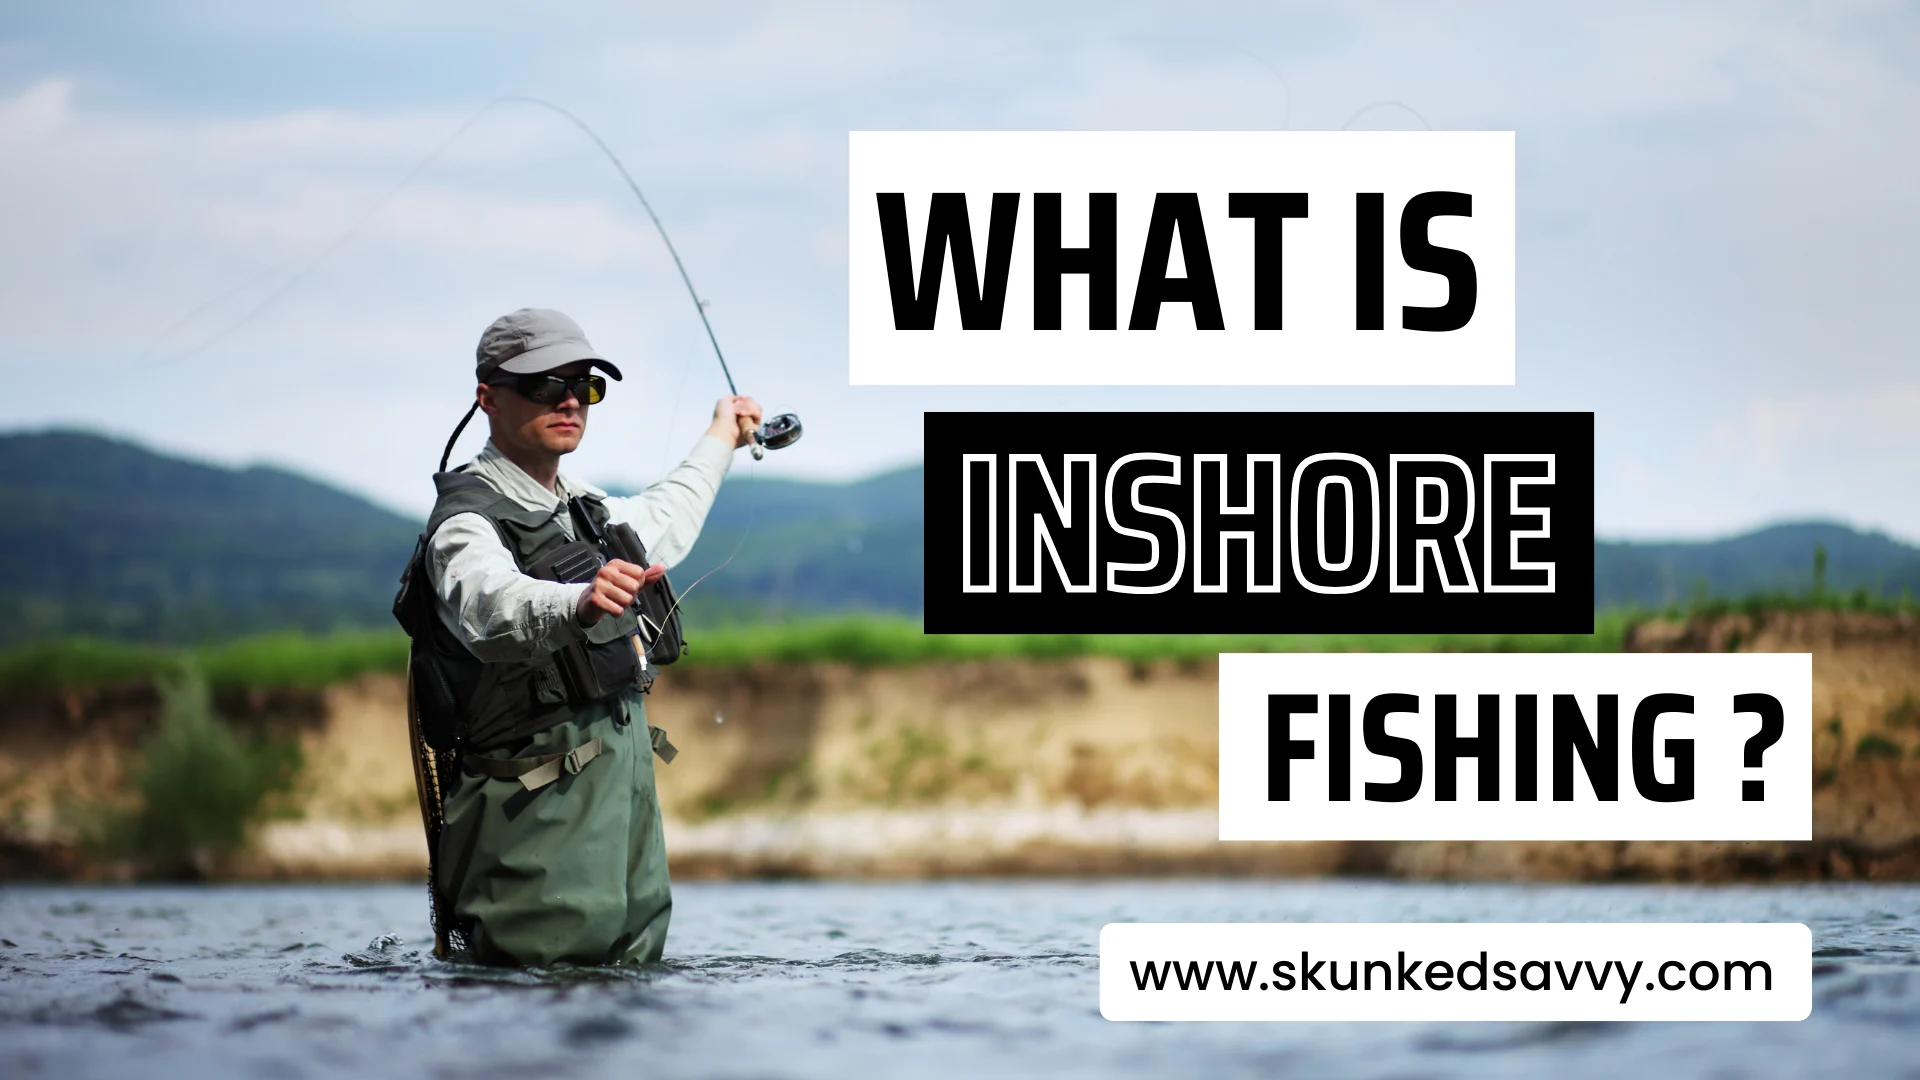 What is Inshore Fishing